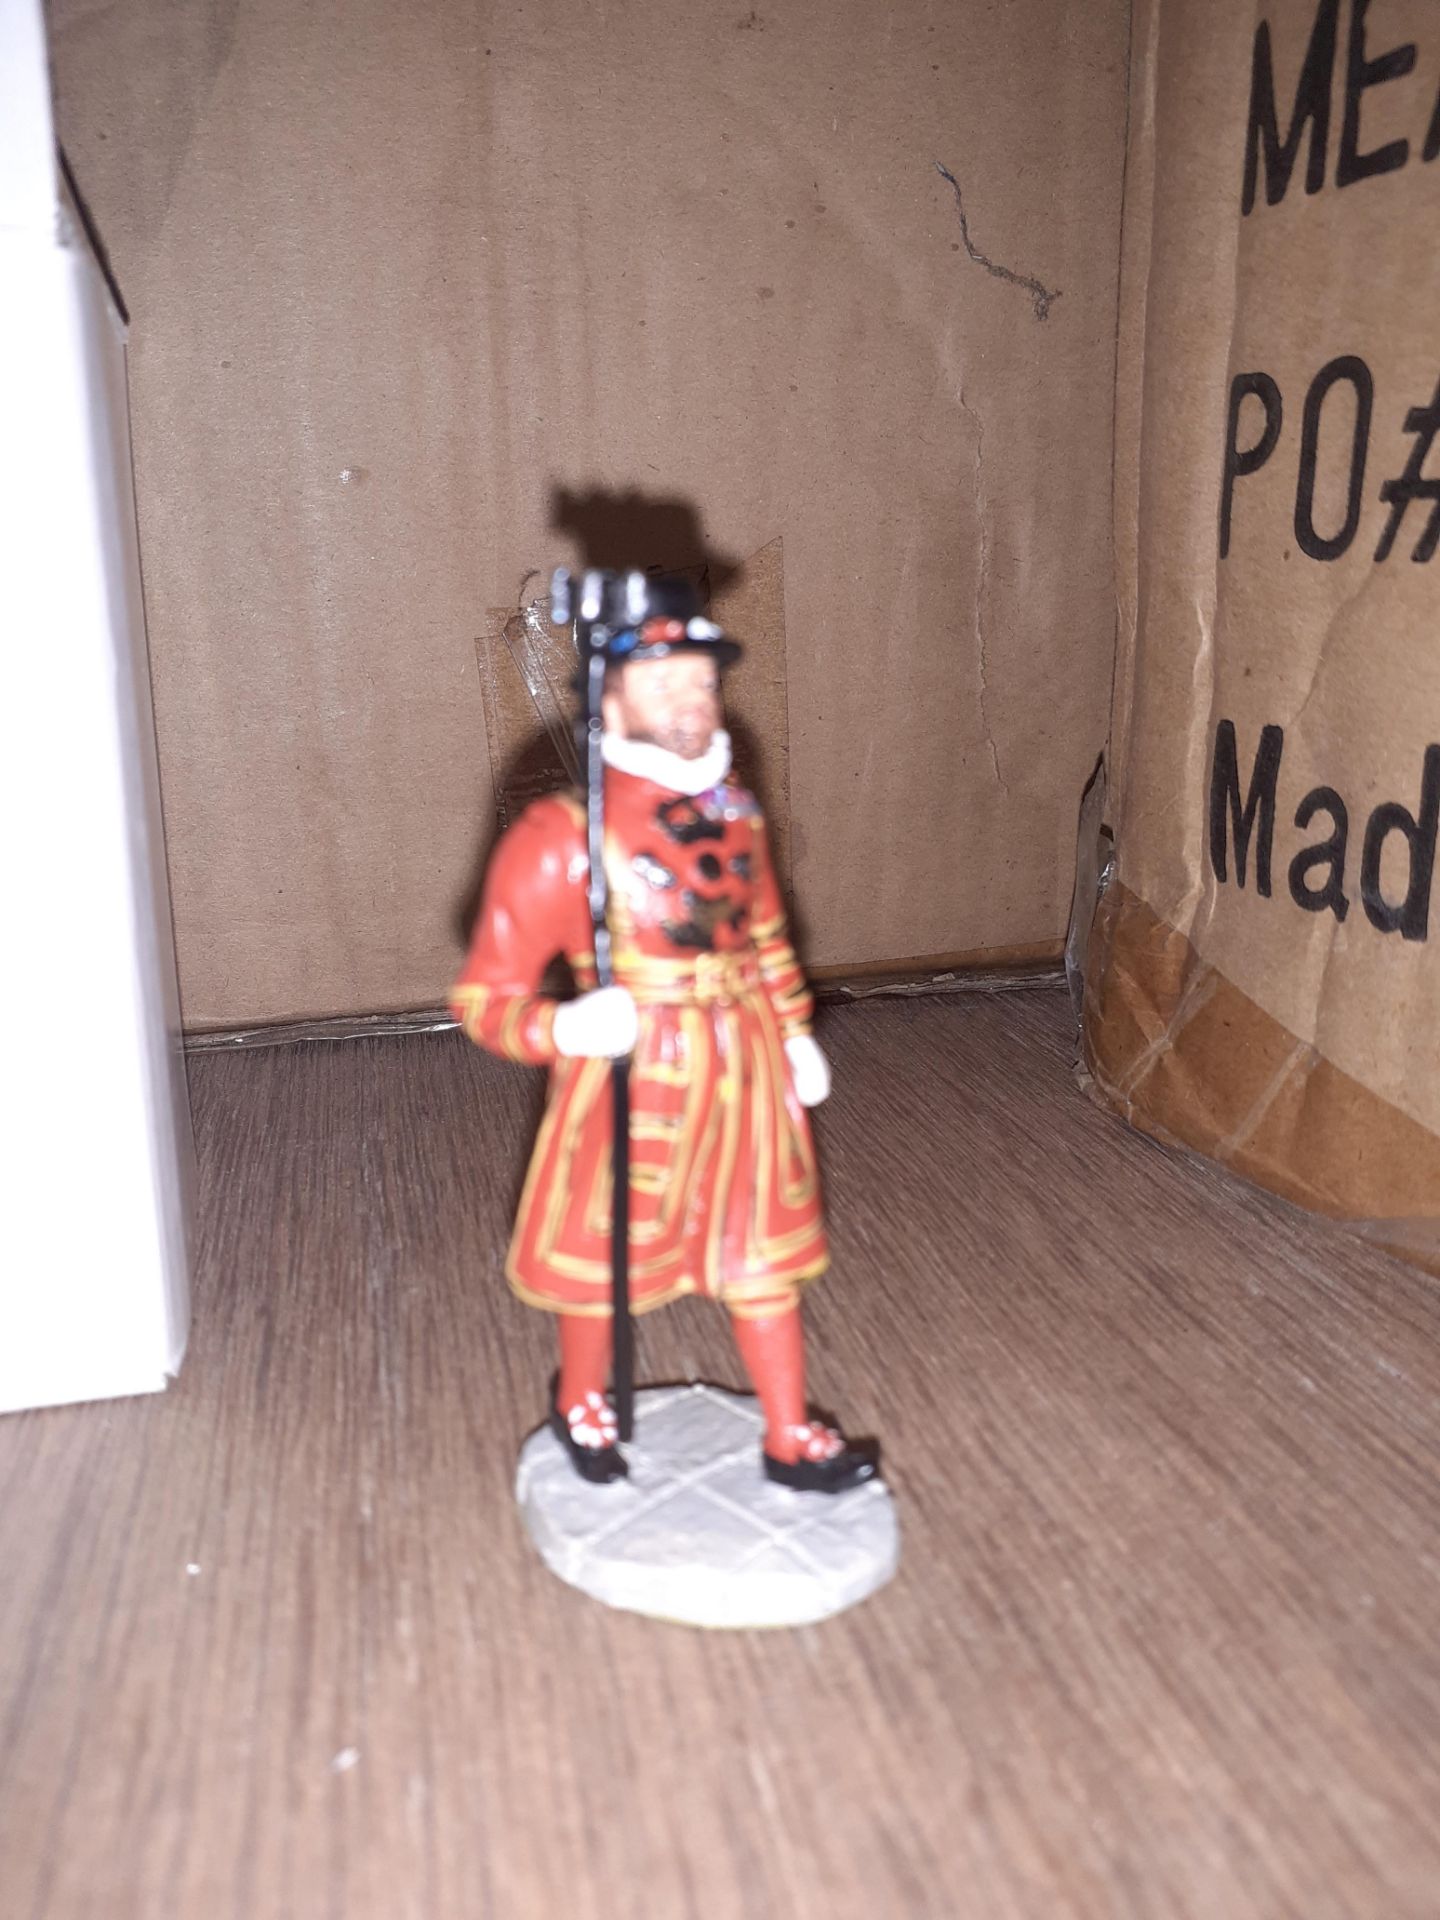 Contents of Shelf to include Royalty Themed Ornaments - Image 3 of 4